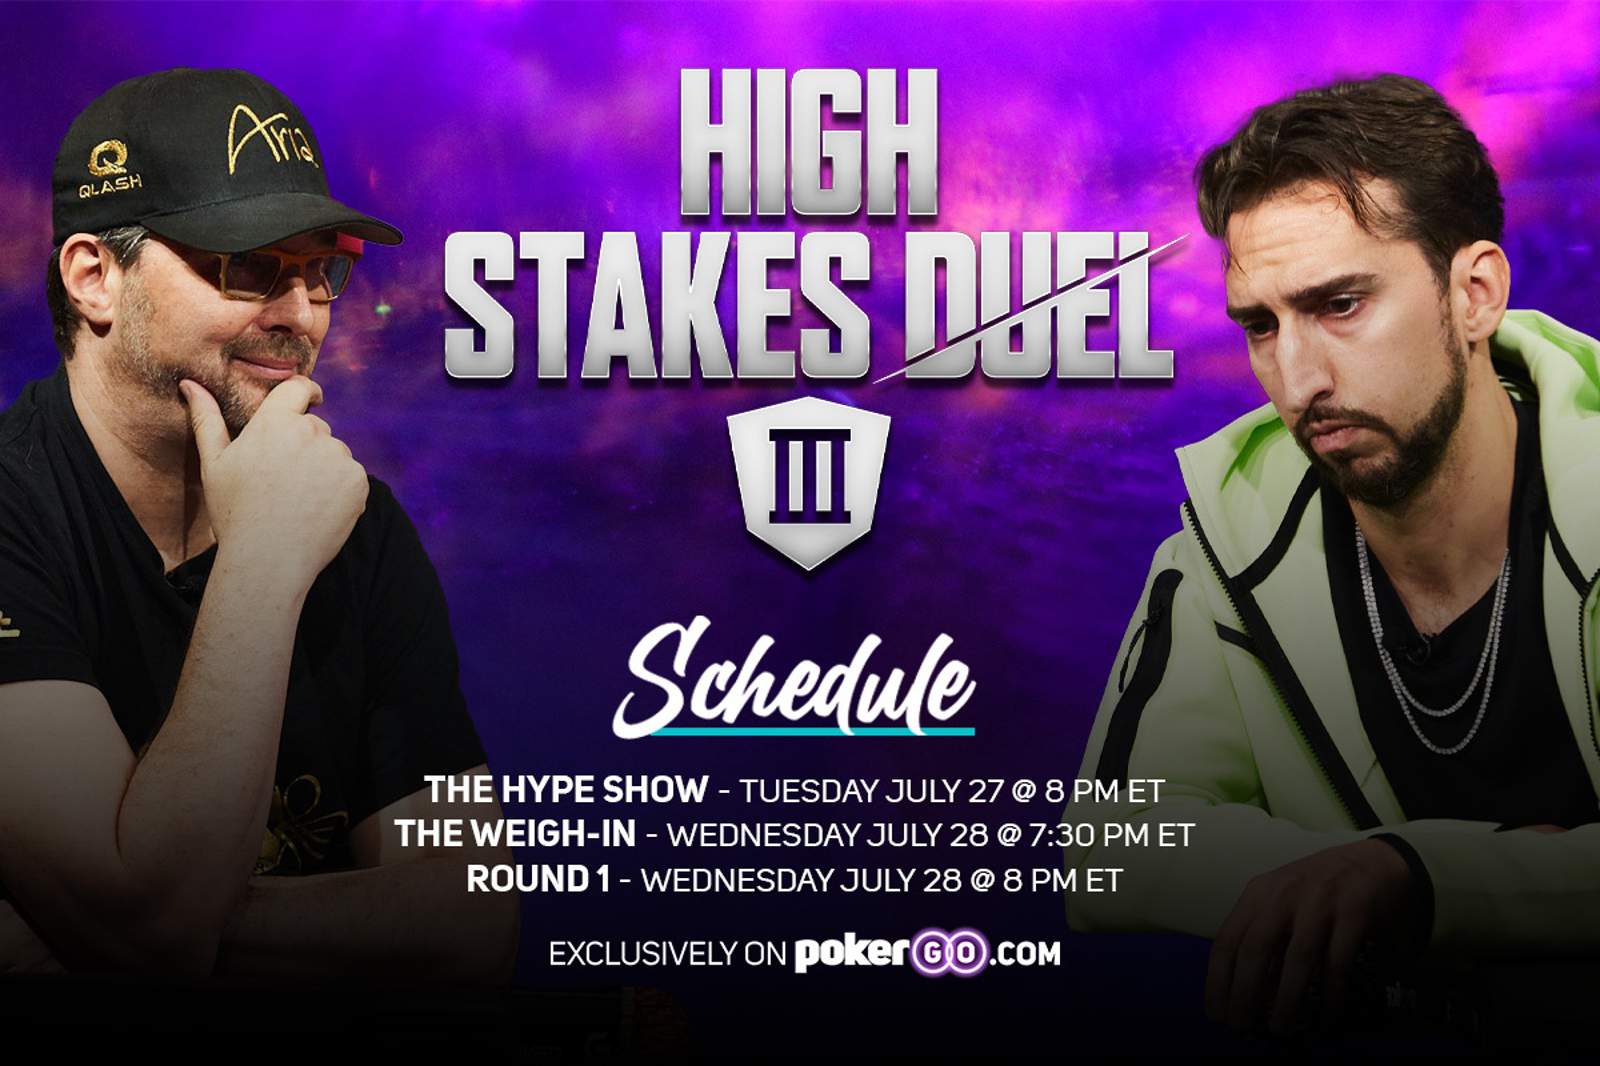 Round 1 of High Stakes Duel III Schedule - 3 Different Shows Over 2 Nights